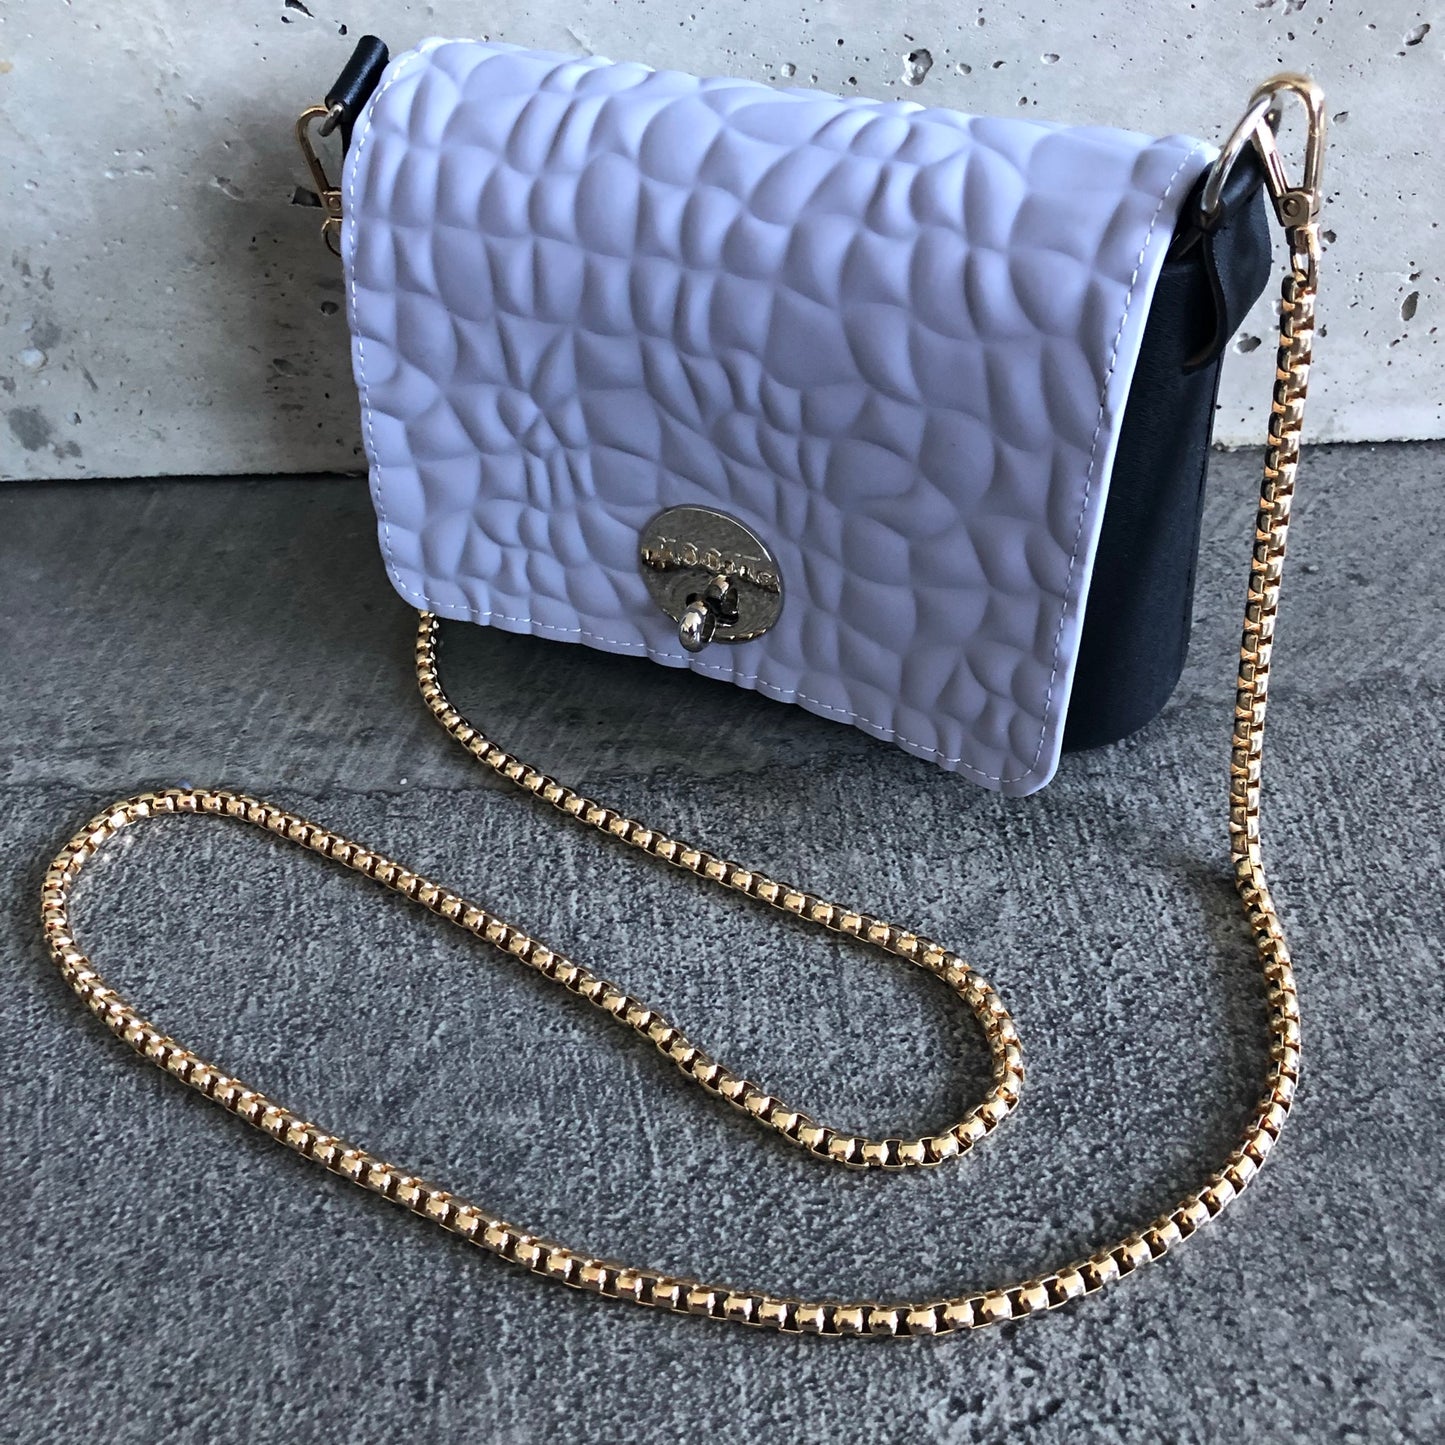 Periwinkle on Black with Gold Chain